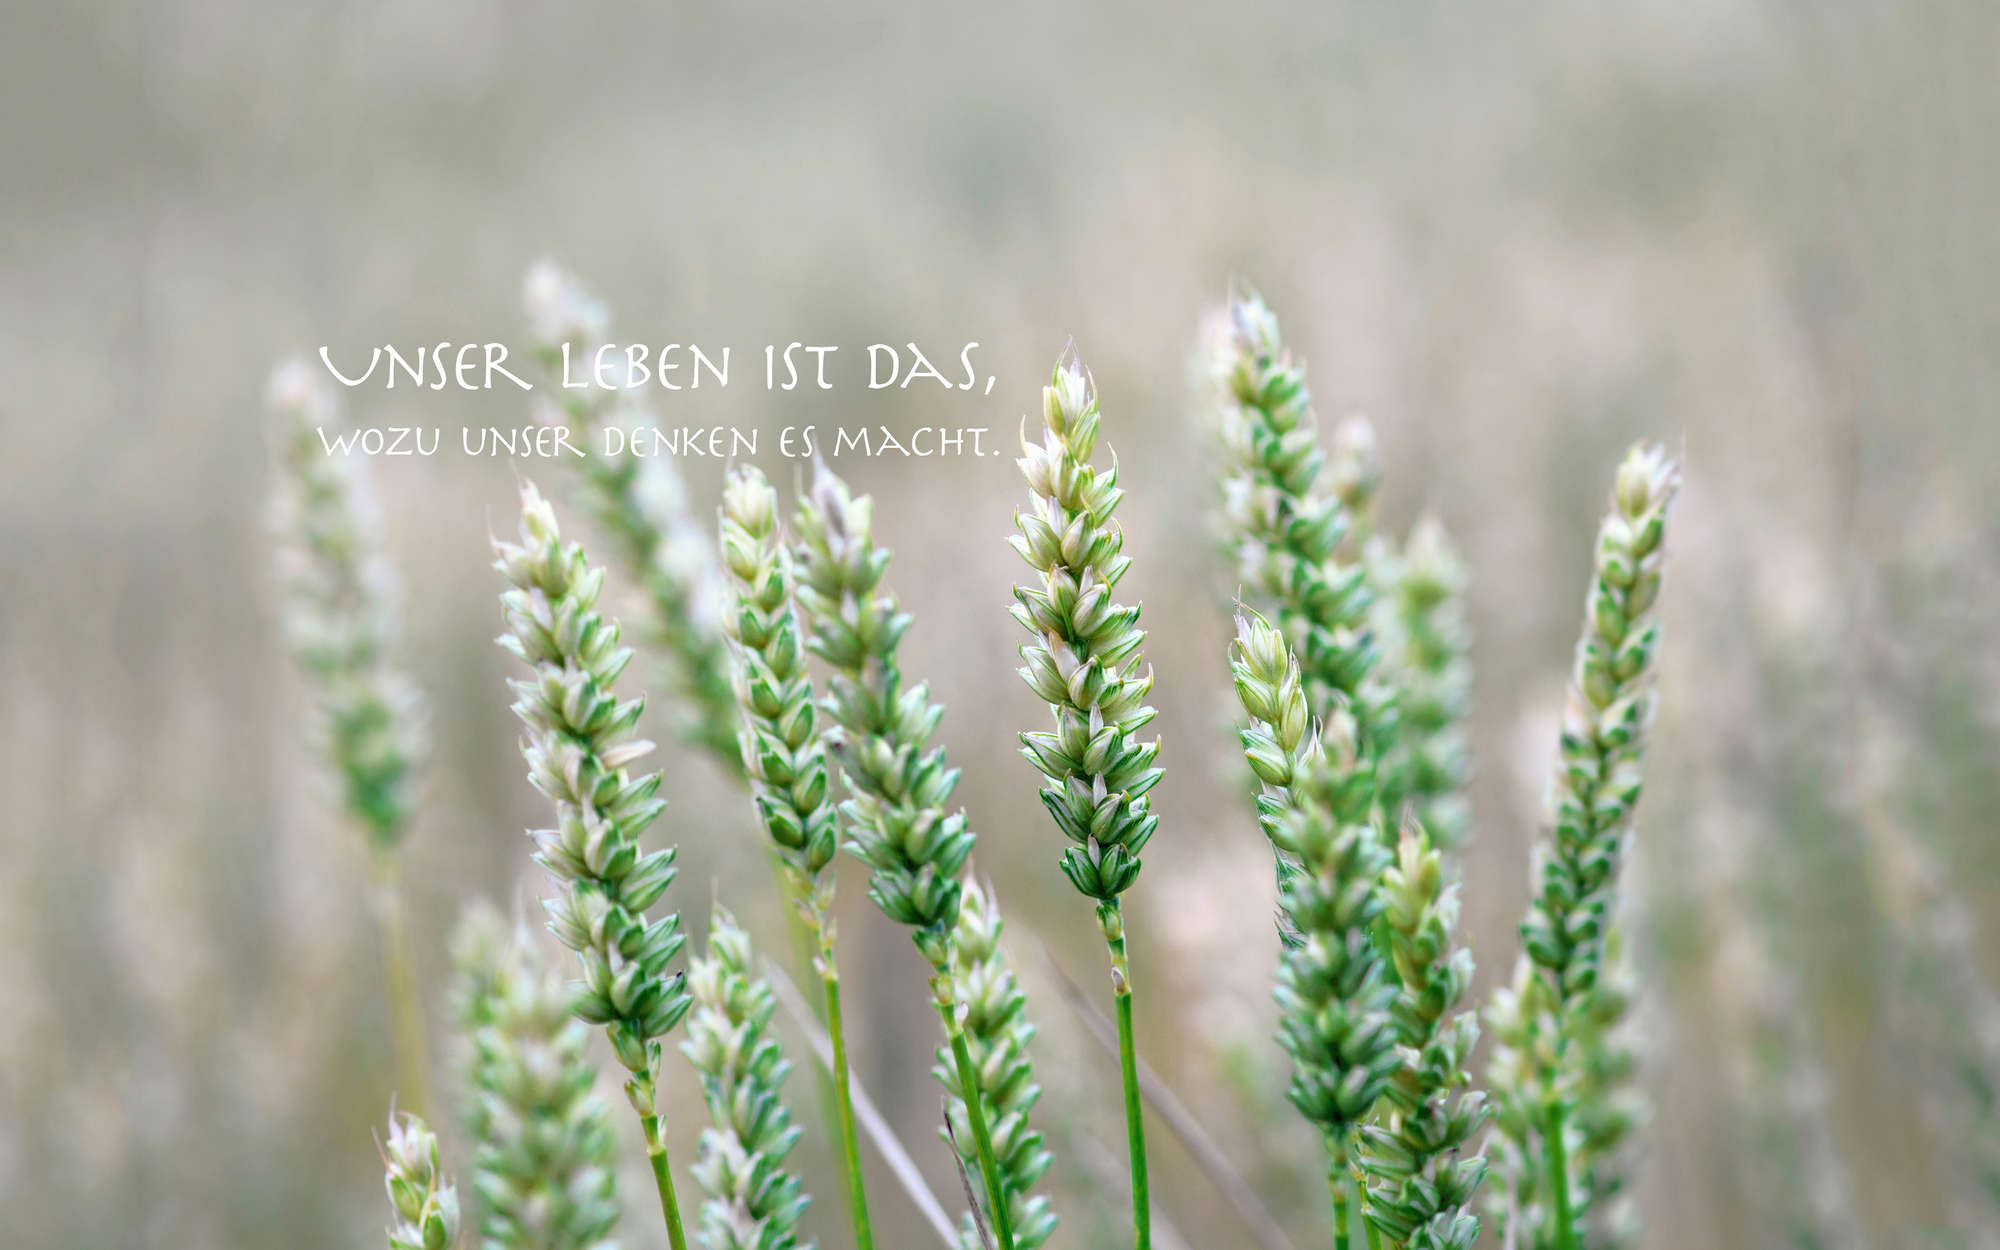             Photo wallpaper detail of wheat with lettering - Matt smooth fleece
        